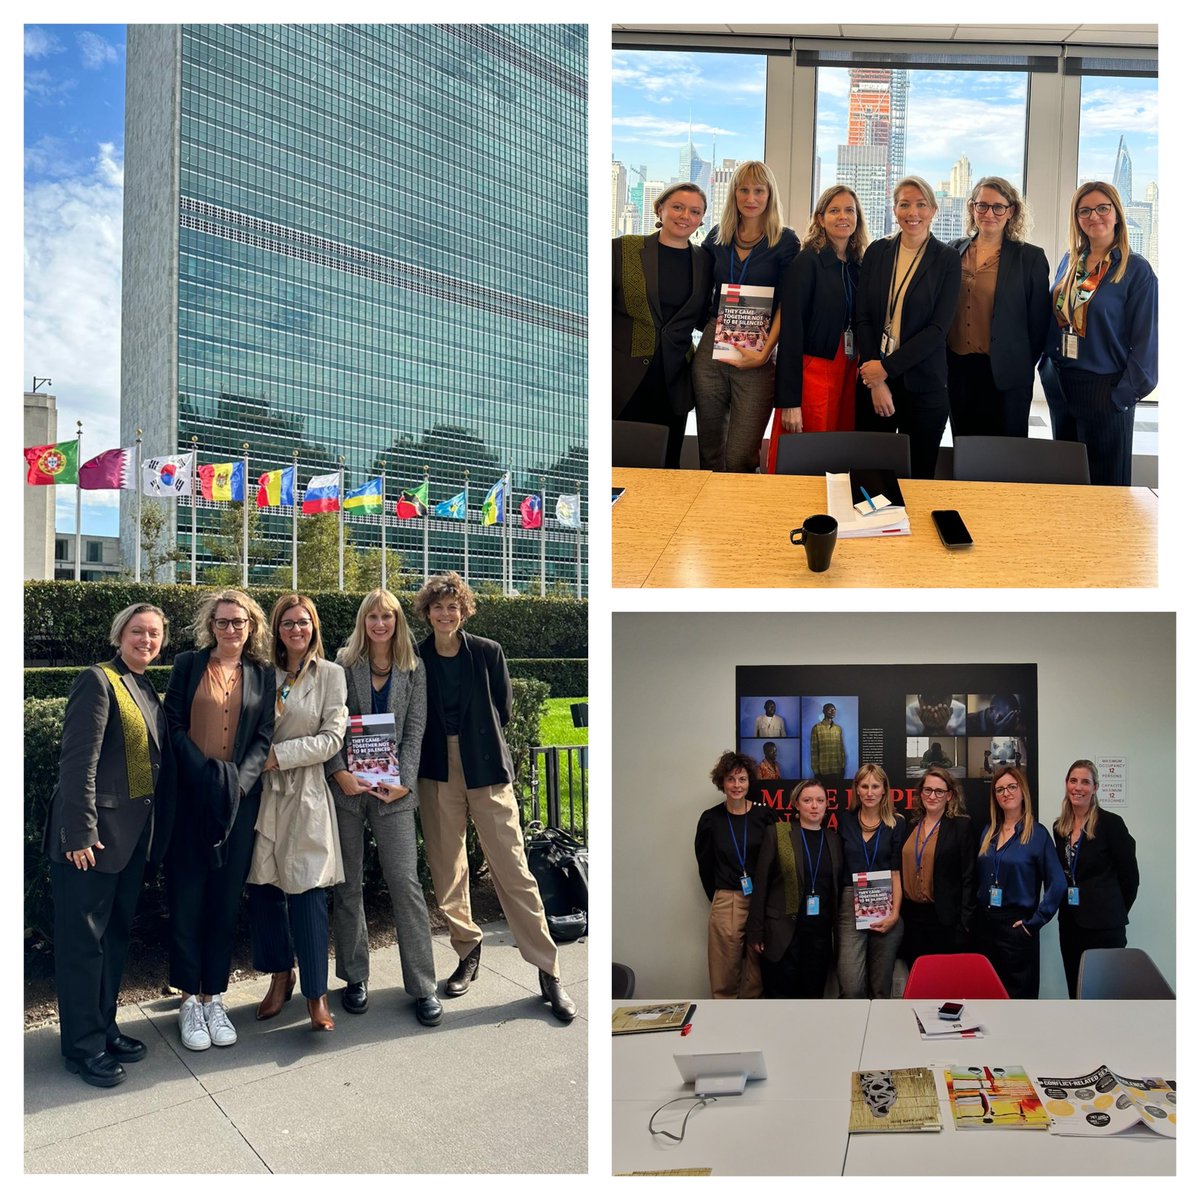 Thrilled to present our report on gender-based violence in conflict at the #WPSWeek in New York! Such vital discussions on #CRSV & the role of women’s rights organisations. Thank you to @SwedenUN & the @UN Office of the SRSG on Sexual Violence in Conflict for meeting with us. 🤝